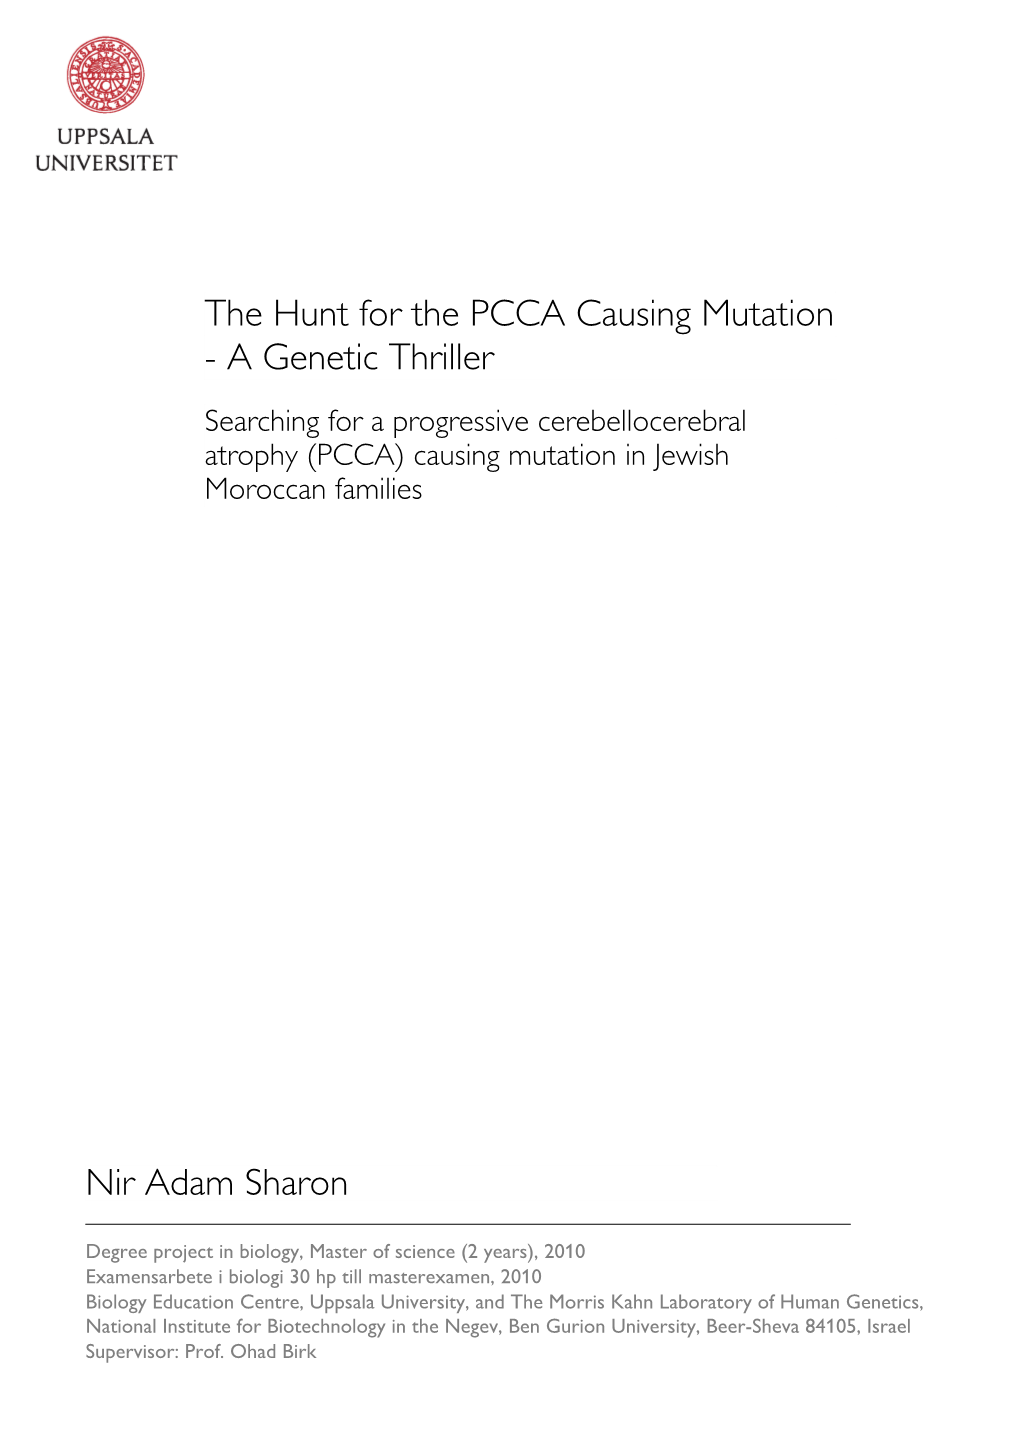 The Hunt for the PCCA Causing Mutation - a Genetic Thriller Searching for a Progressive Cerebellocerebral Atrophy (PCCA) Causing Mutation in Jewish Moroccan Families